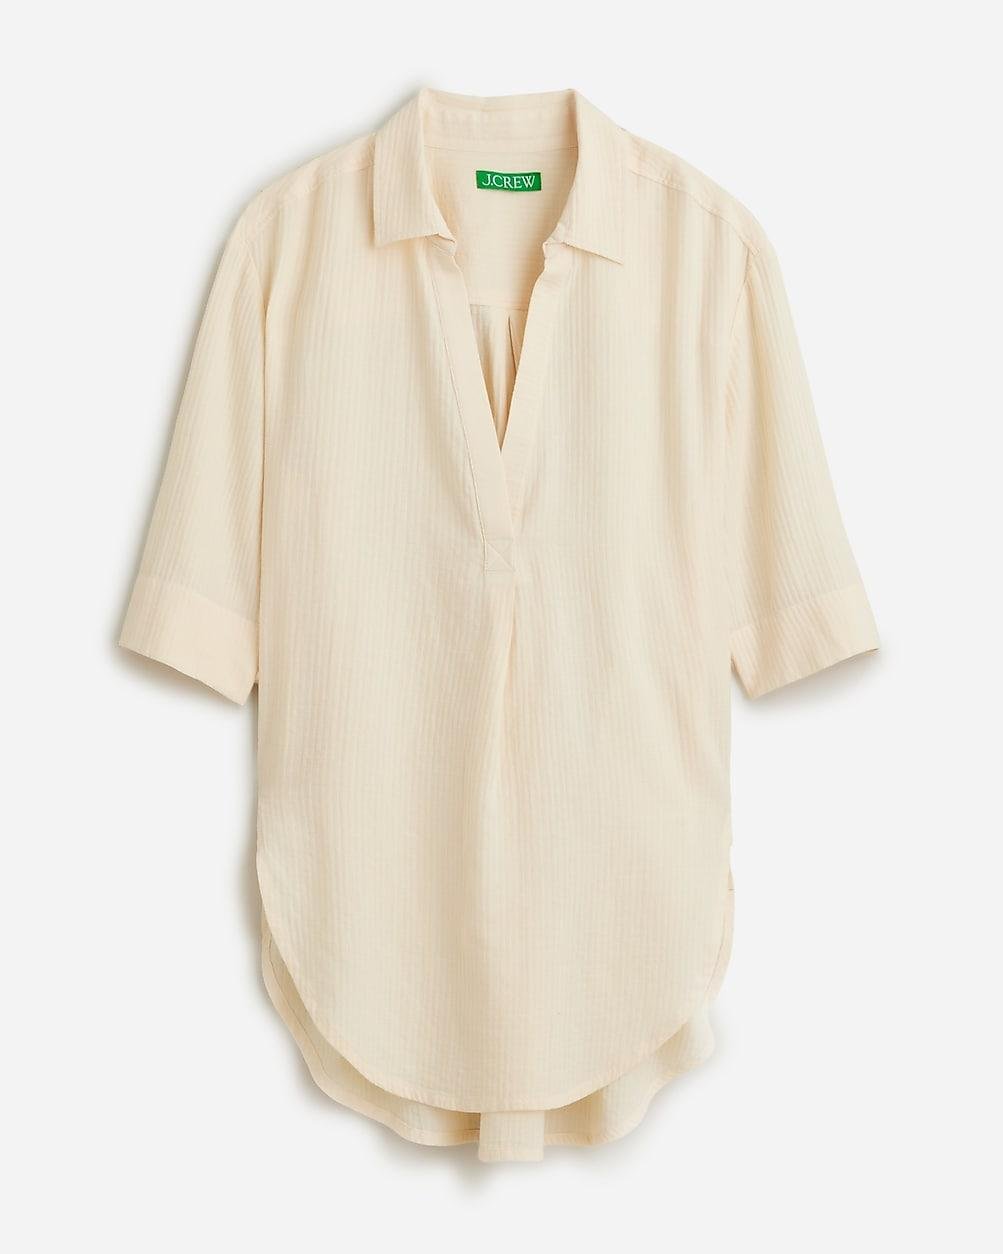 Popover shirt in airy gauze by J.CREW